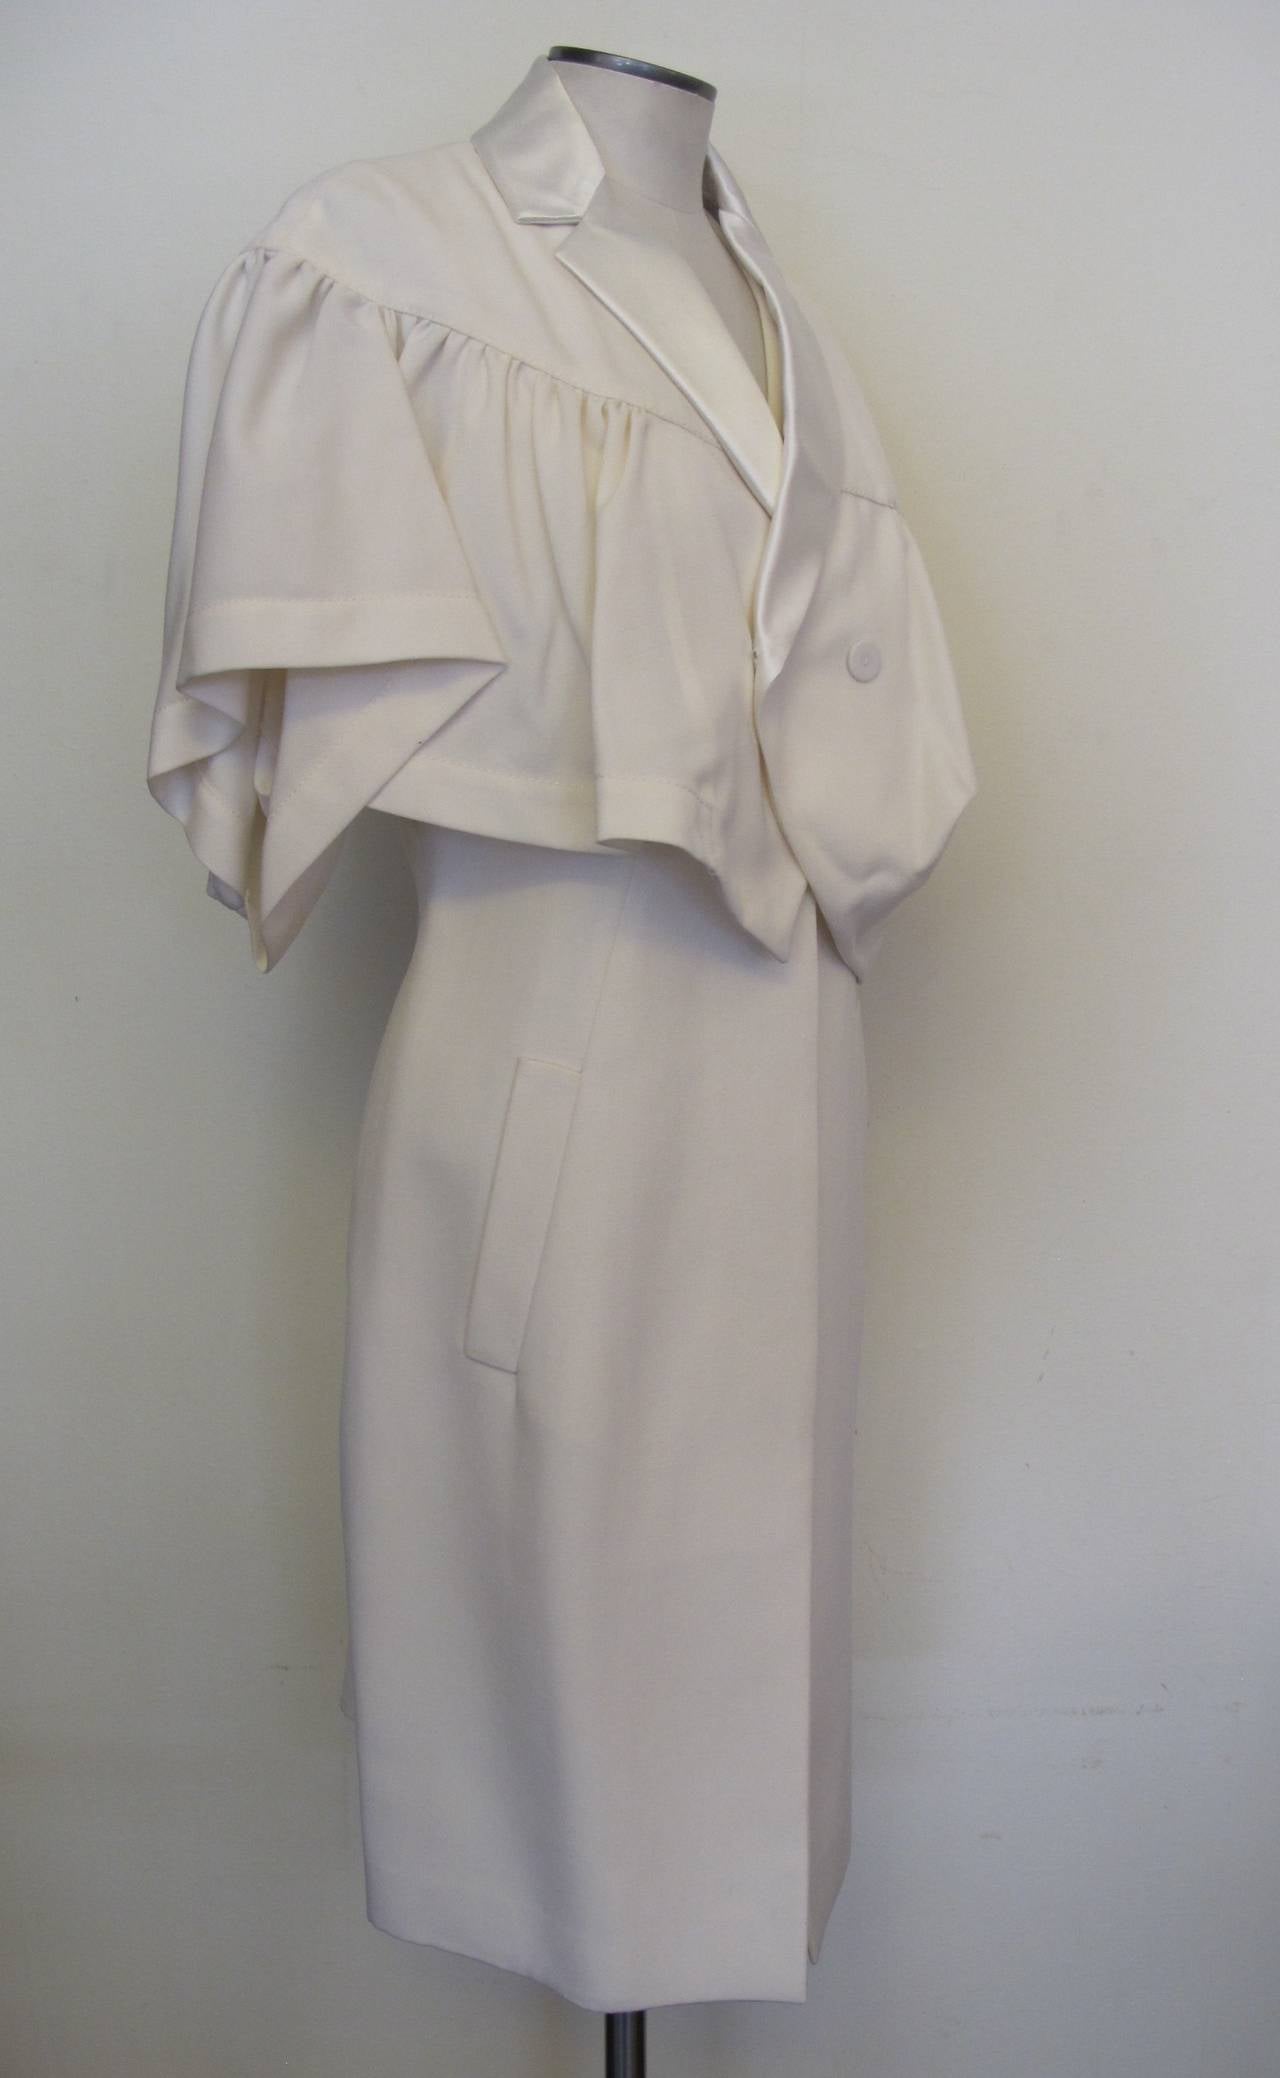 New Givenchy Asymmetrical Coat Dress In New Condition For Sale In San Francisco, CA